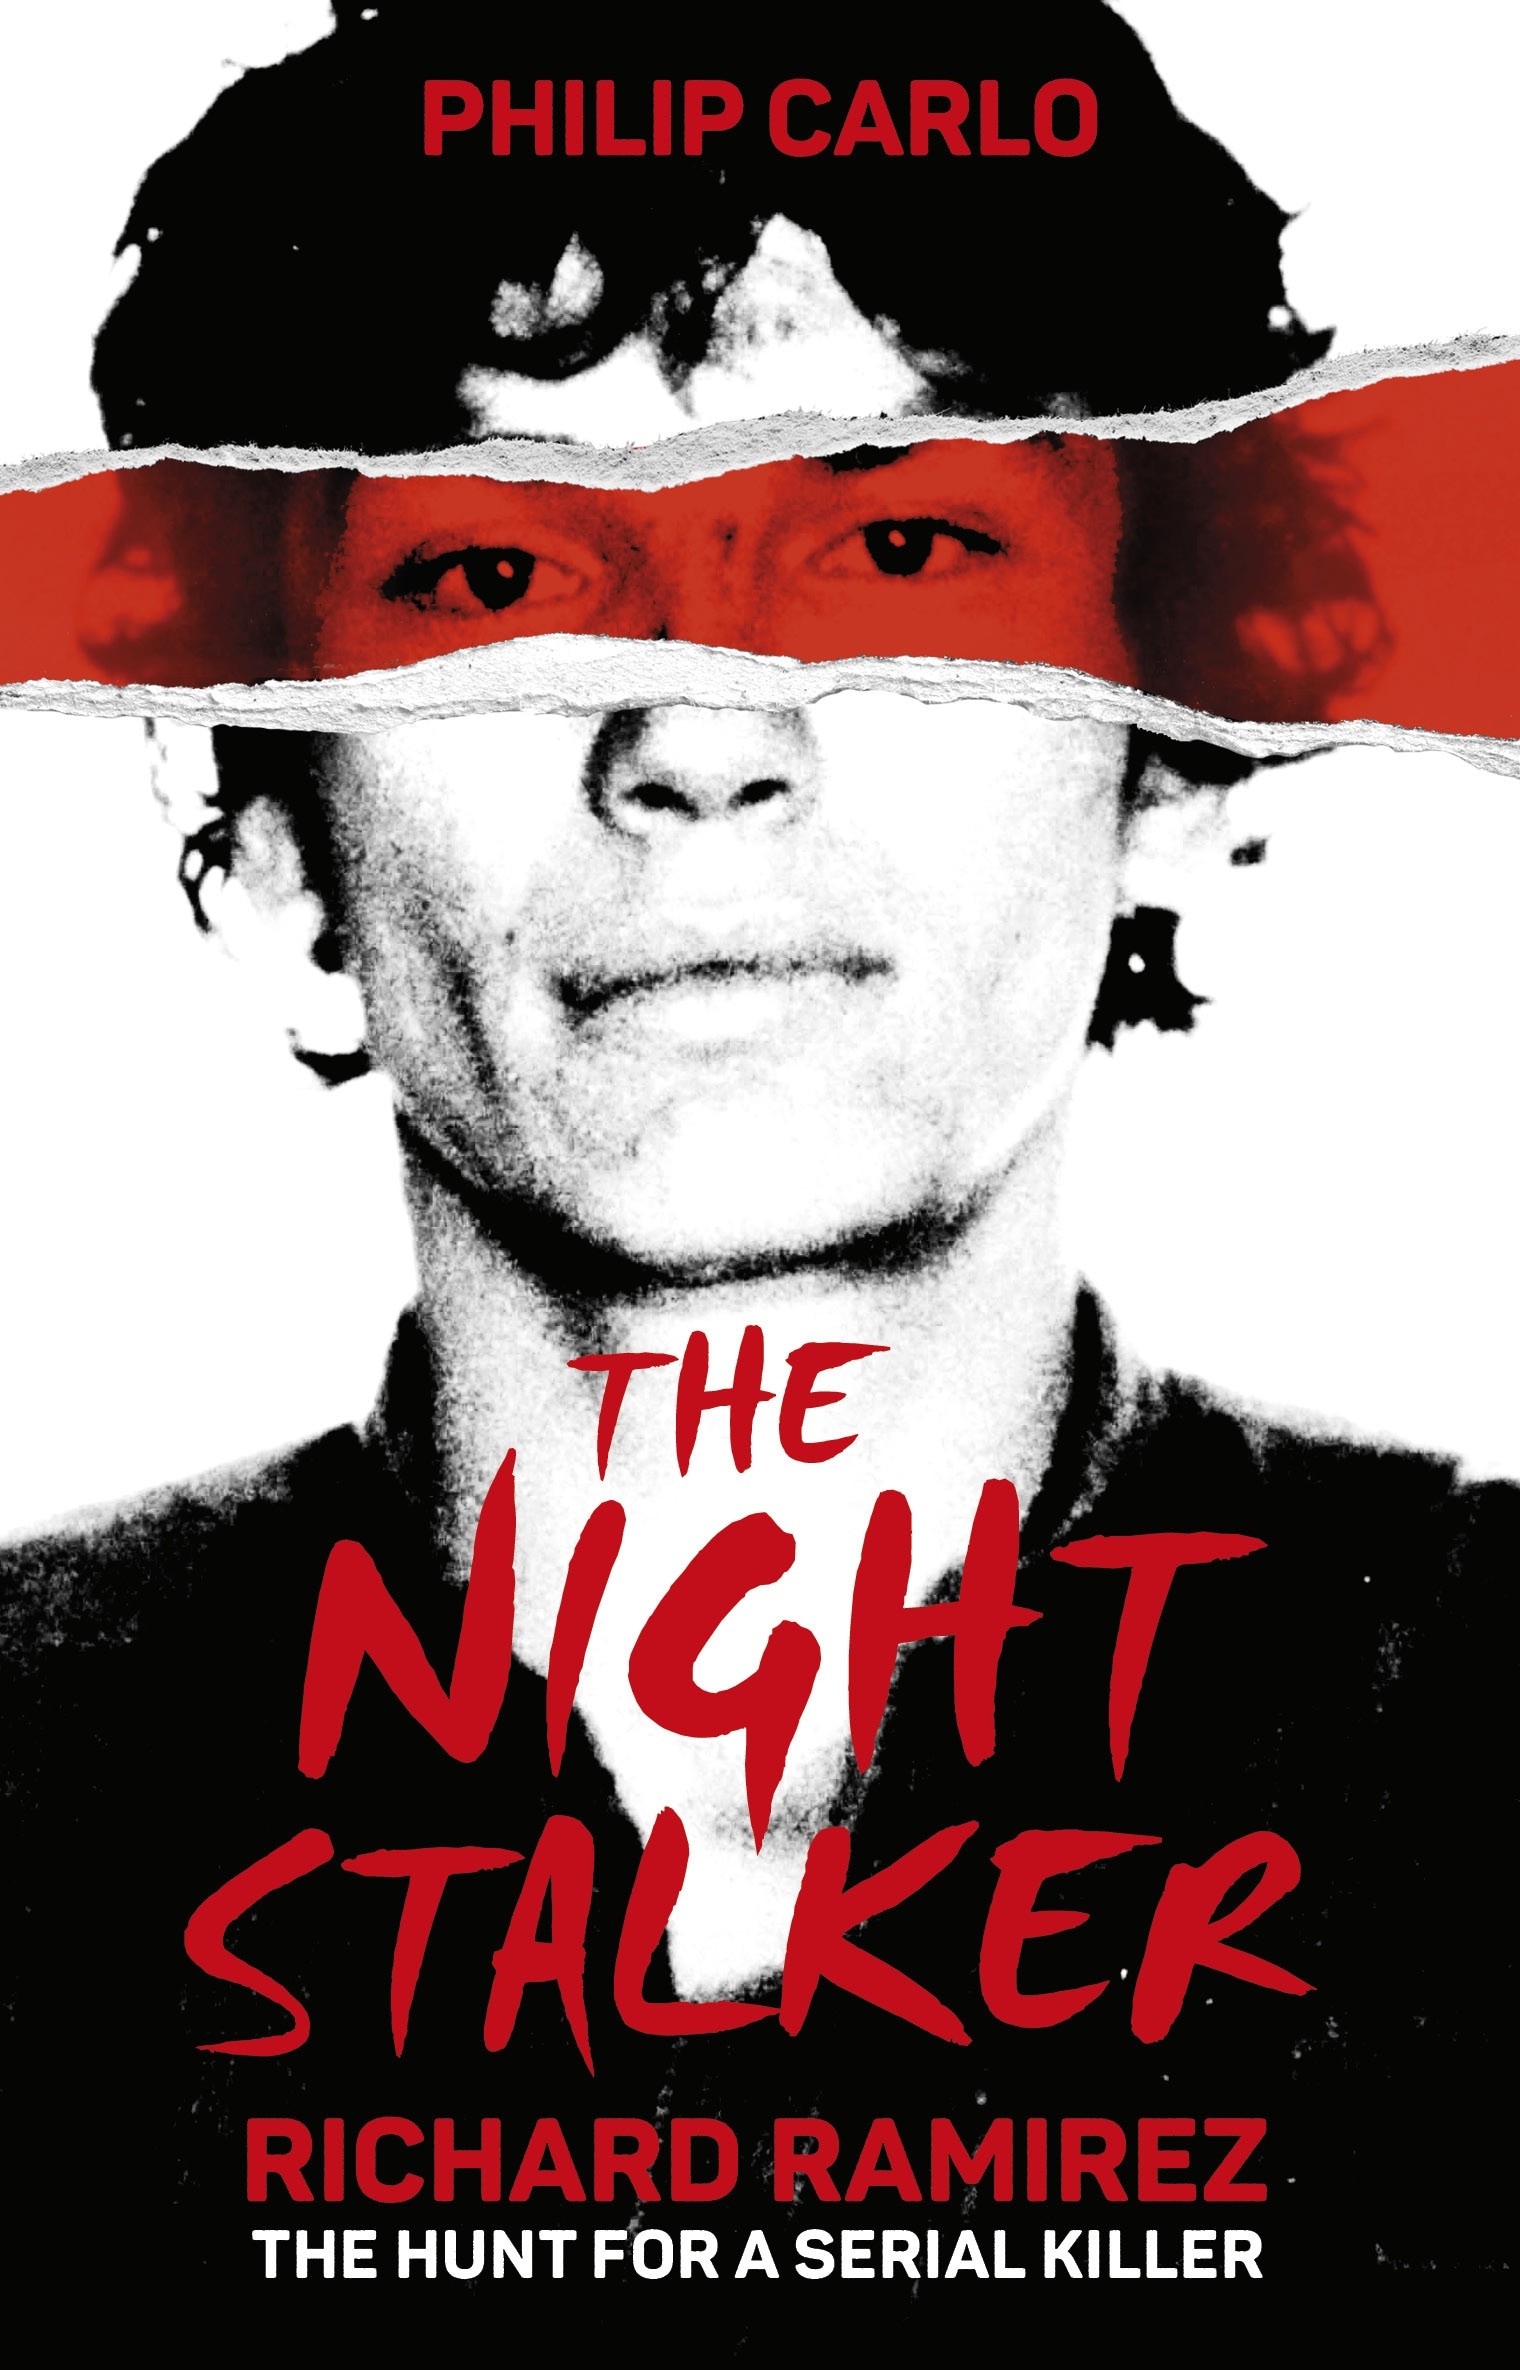 Book “The Night Stalker” by Philip Carlo — March 18, 2021